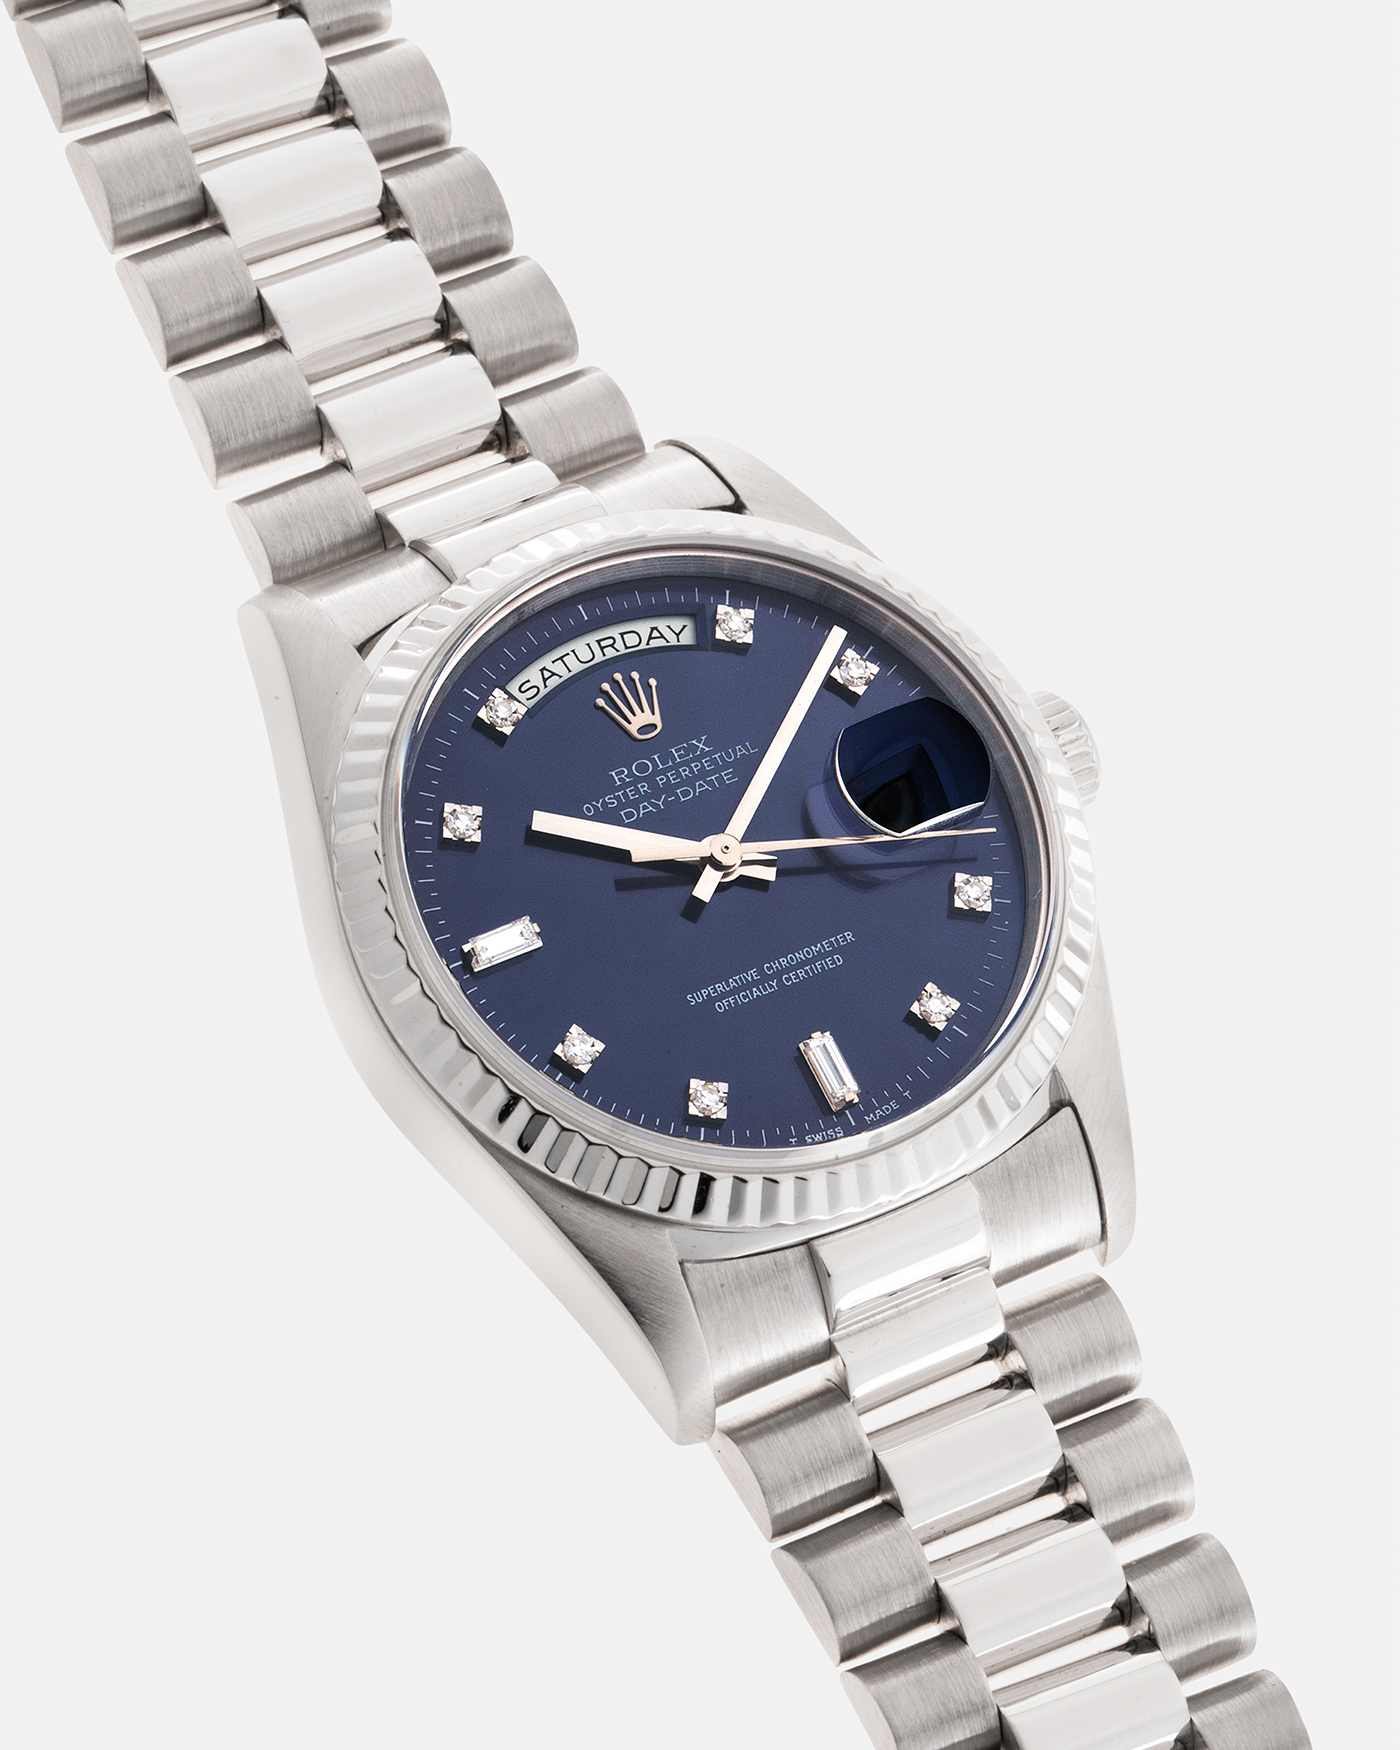 Brand: Rolex Year: 1993 Model: Day-Date Reference Number: 18239 Serial Number: X269XXX Material: 18-carat White Gold, Factory Set Diamond Hour Markers Movement: Rolex Cal. 3155, Self-Winding Case Diameter: 36mm Bracelet: Rolex 18-carat White Gold 8385 Presidential Bracelet with 55B Curved End Links